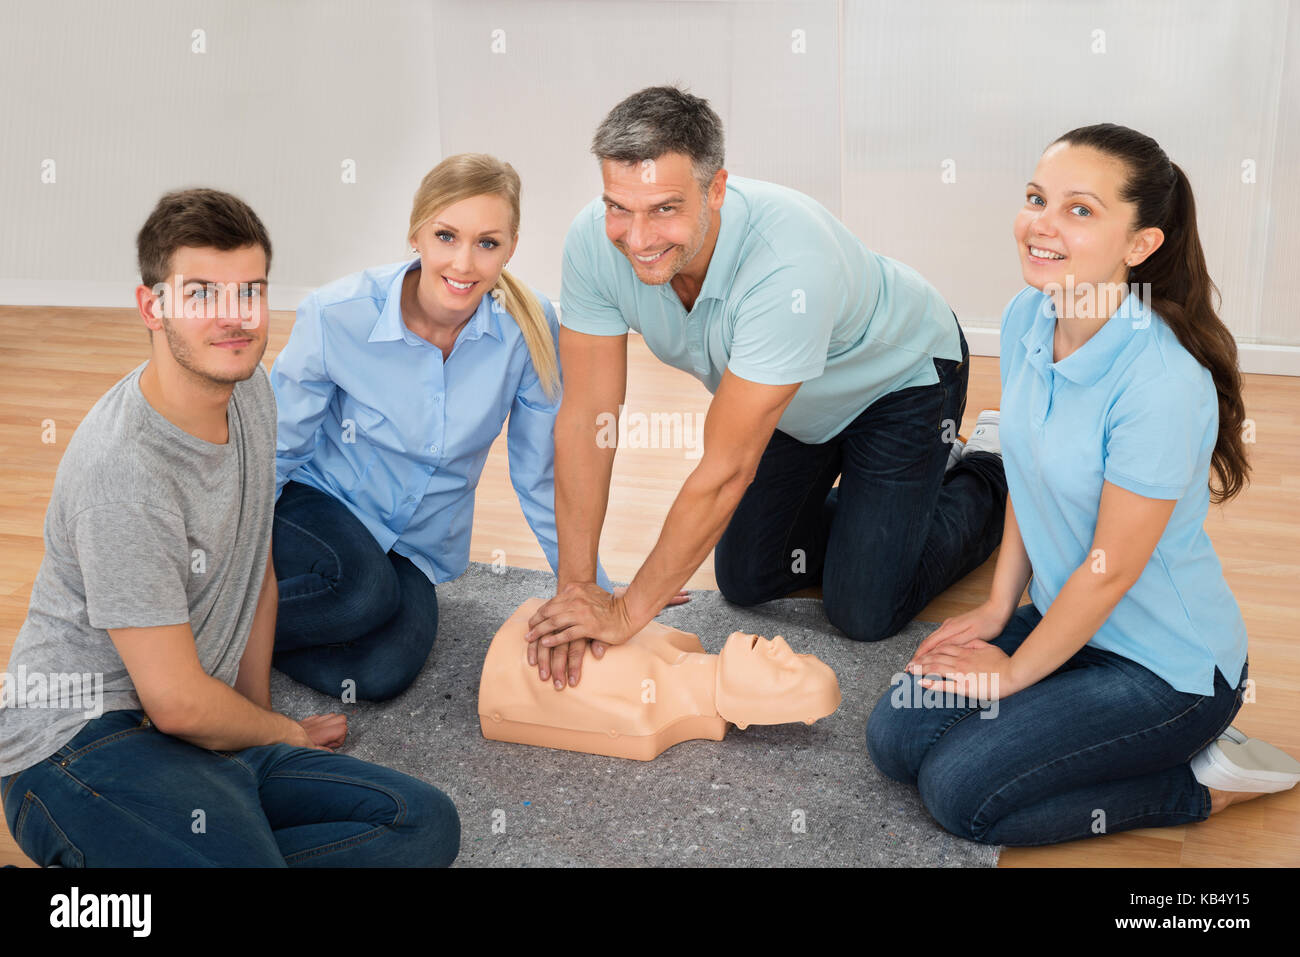 Mature Male Instructor Showing Cpr Training On Dummy To His Student Stock Photo